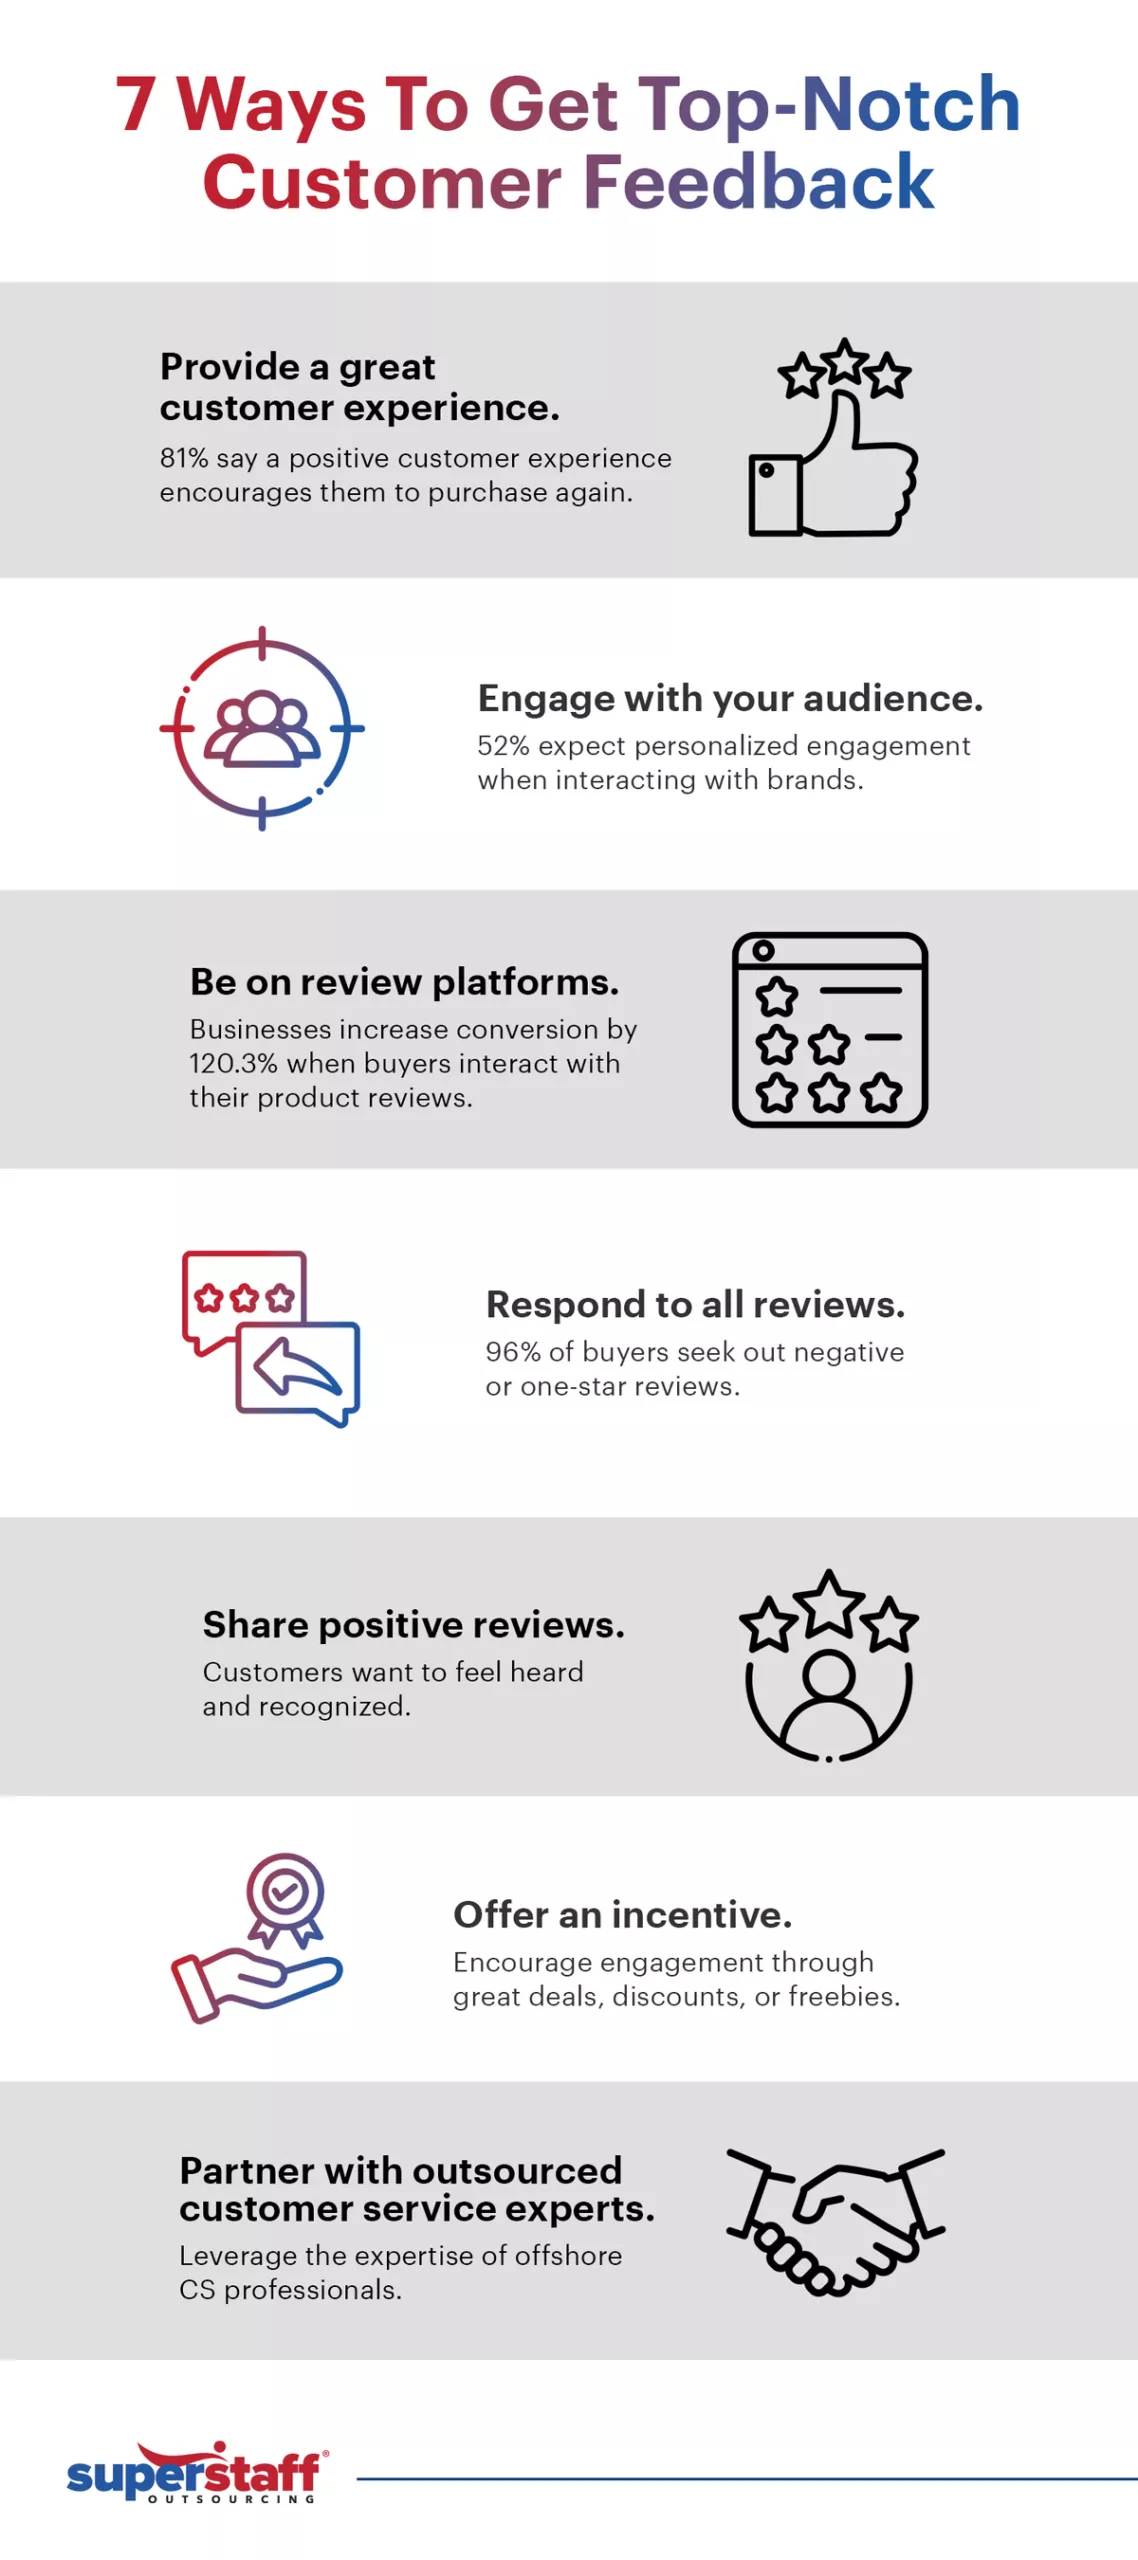 An infographic showing effective strategies to get positive customer feedback.